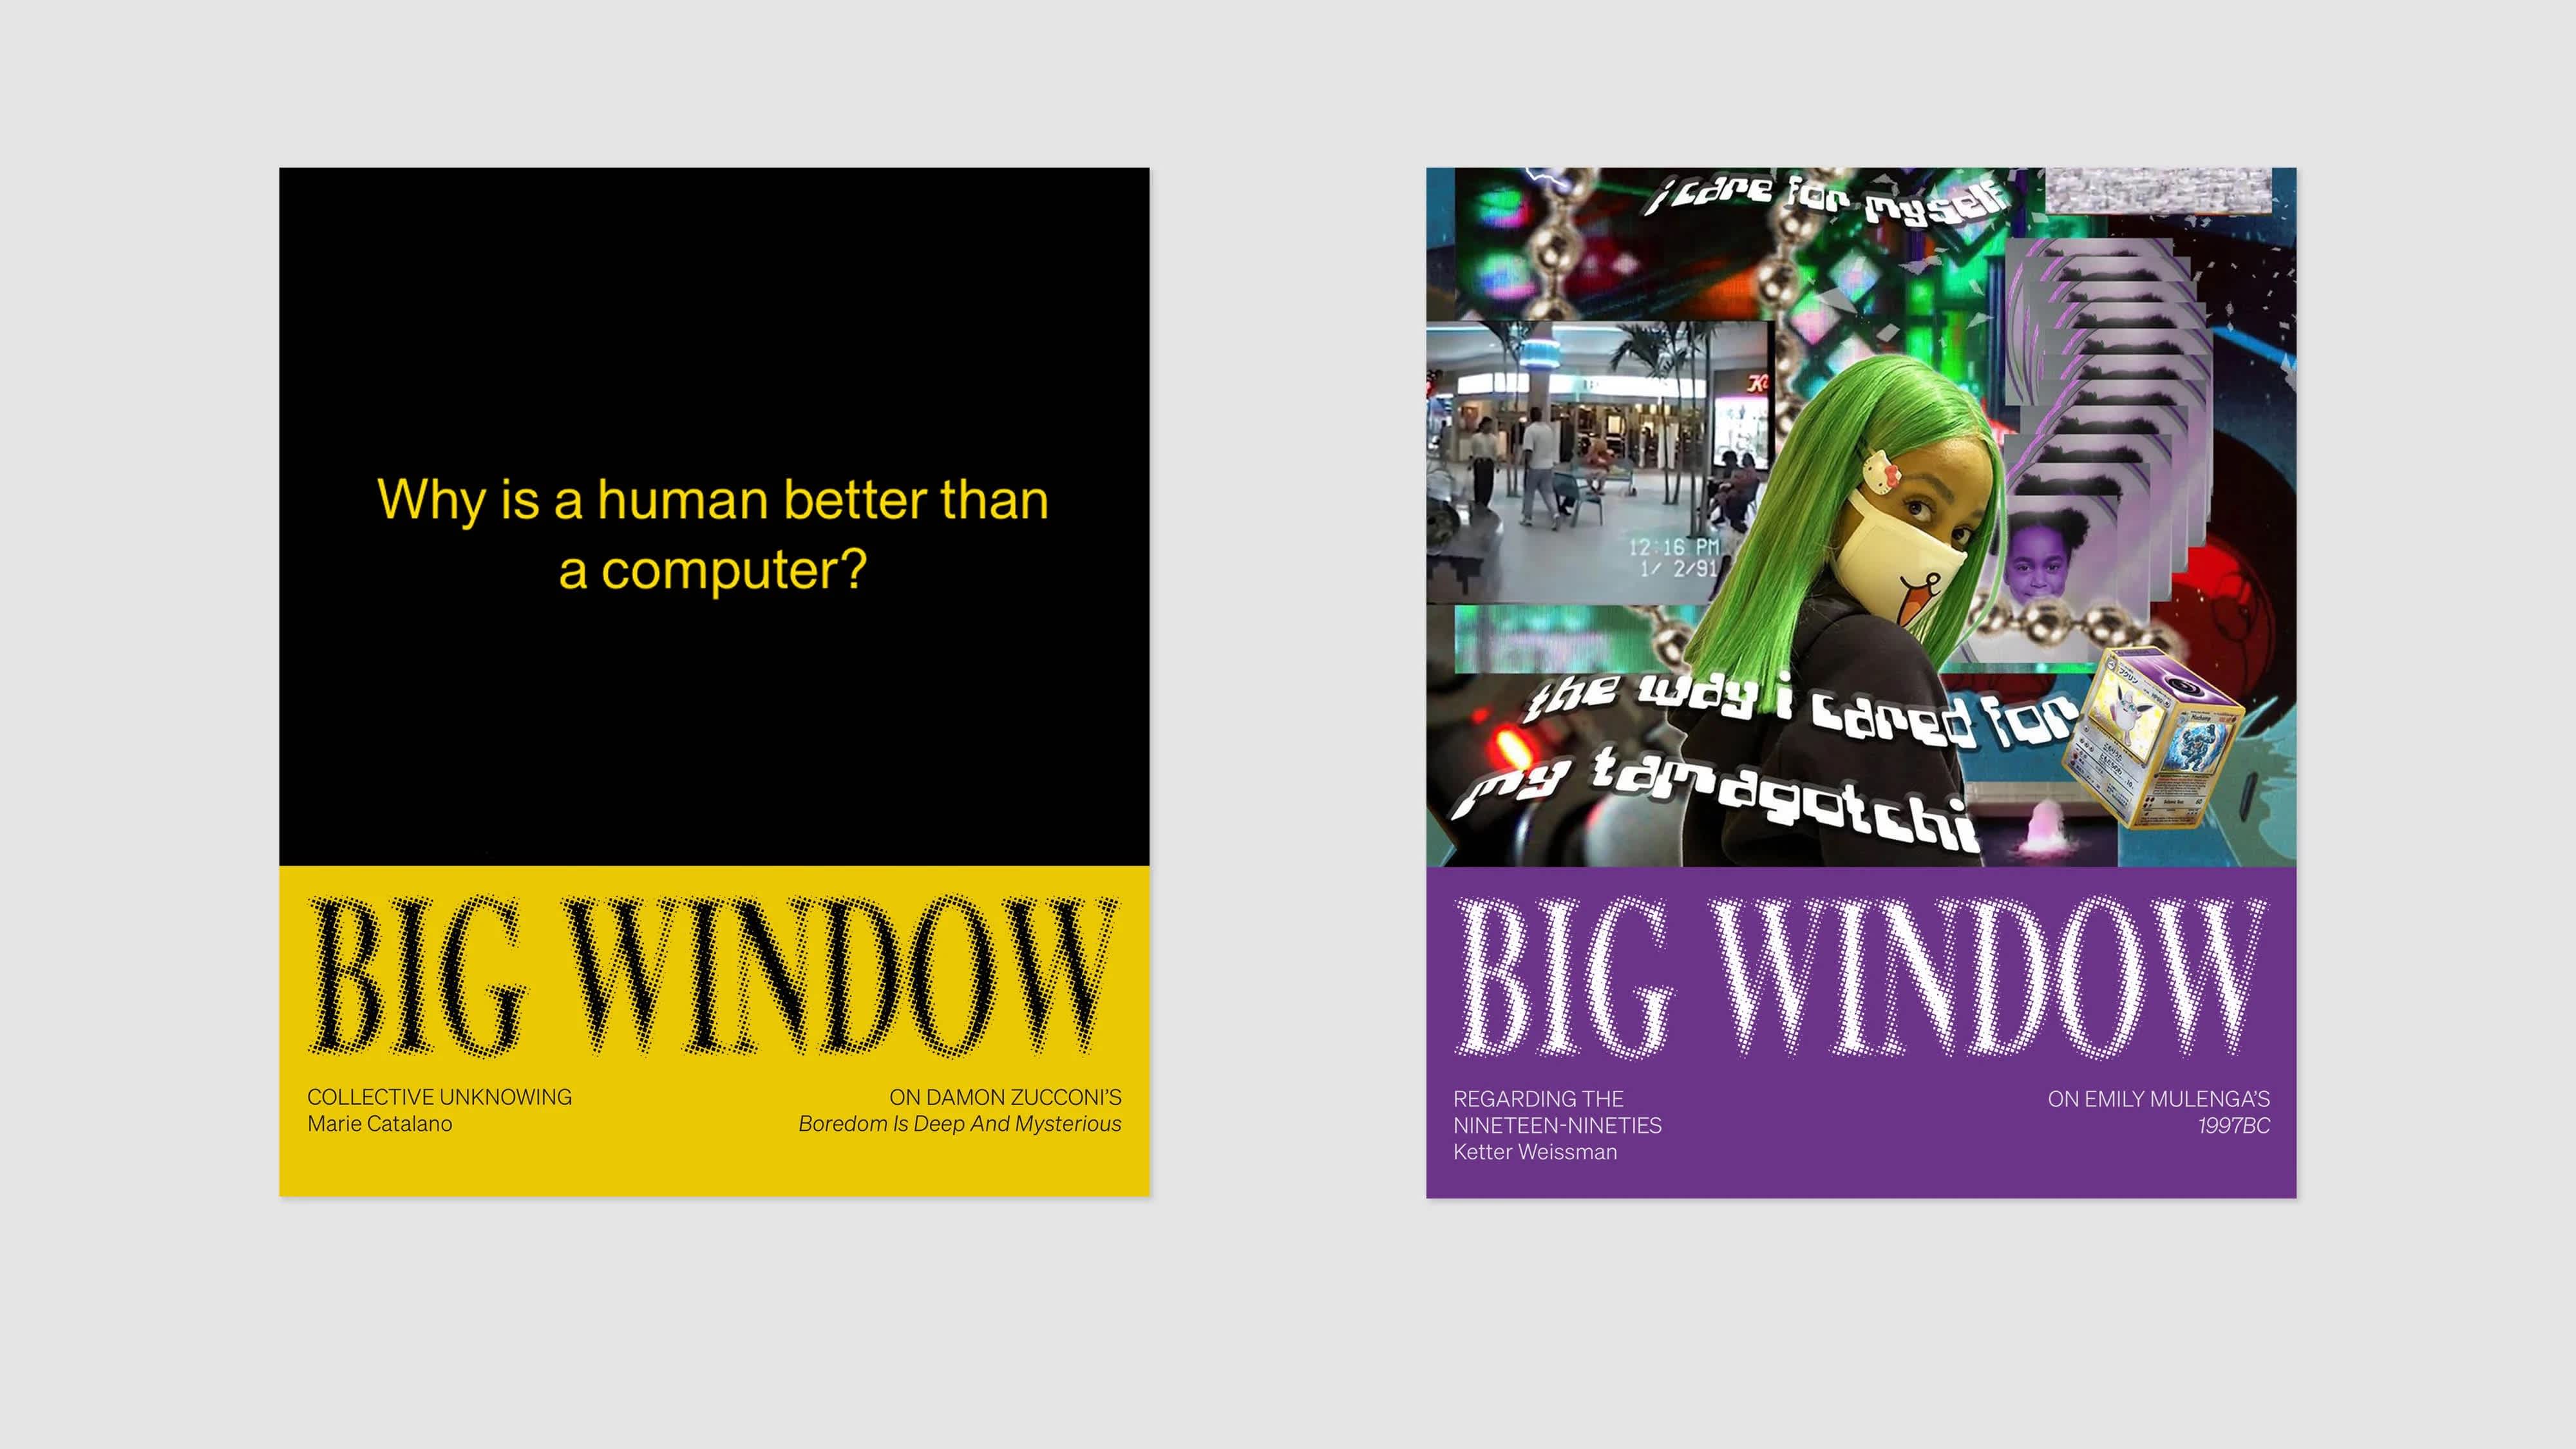 Two colorful square images on a light gray background. The left image is black and yellow. The right image is purple, green and white. Both images have the text "Big Window" at the bottom. 